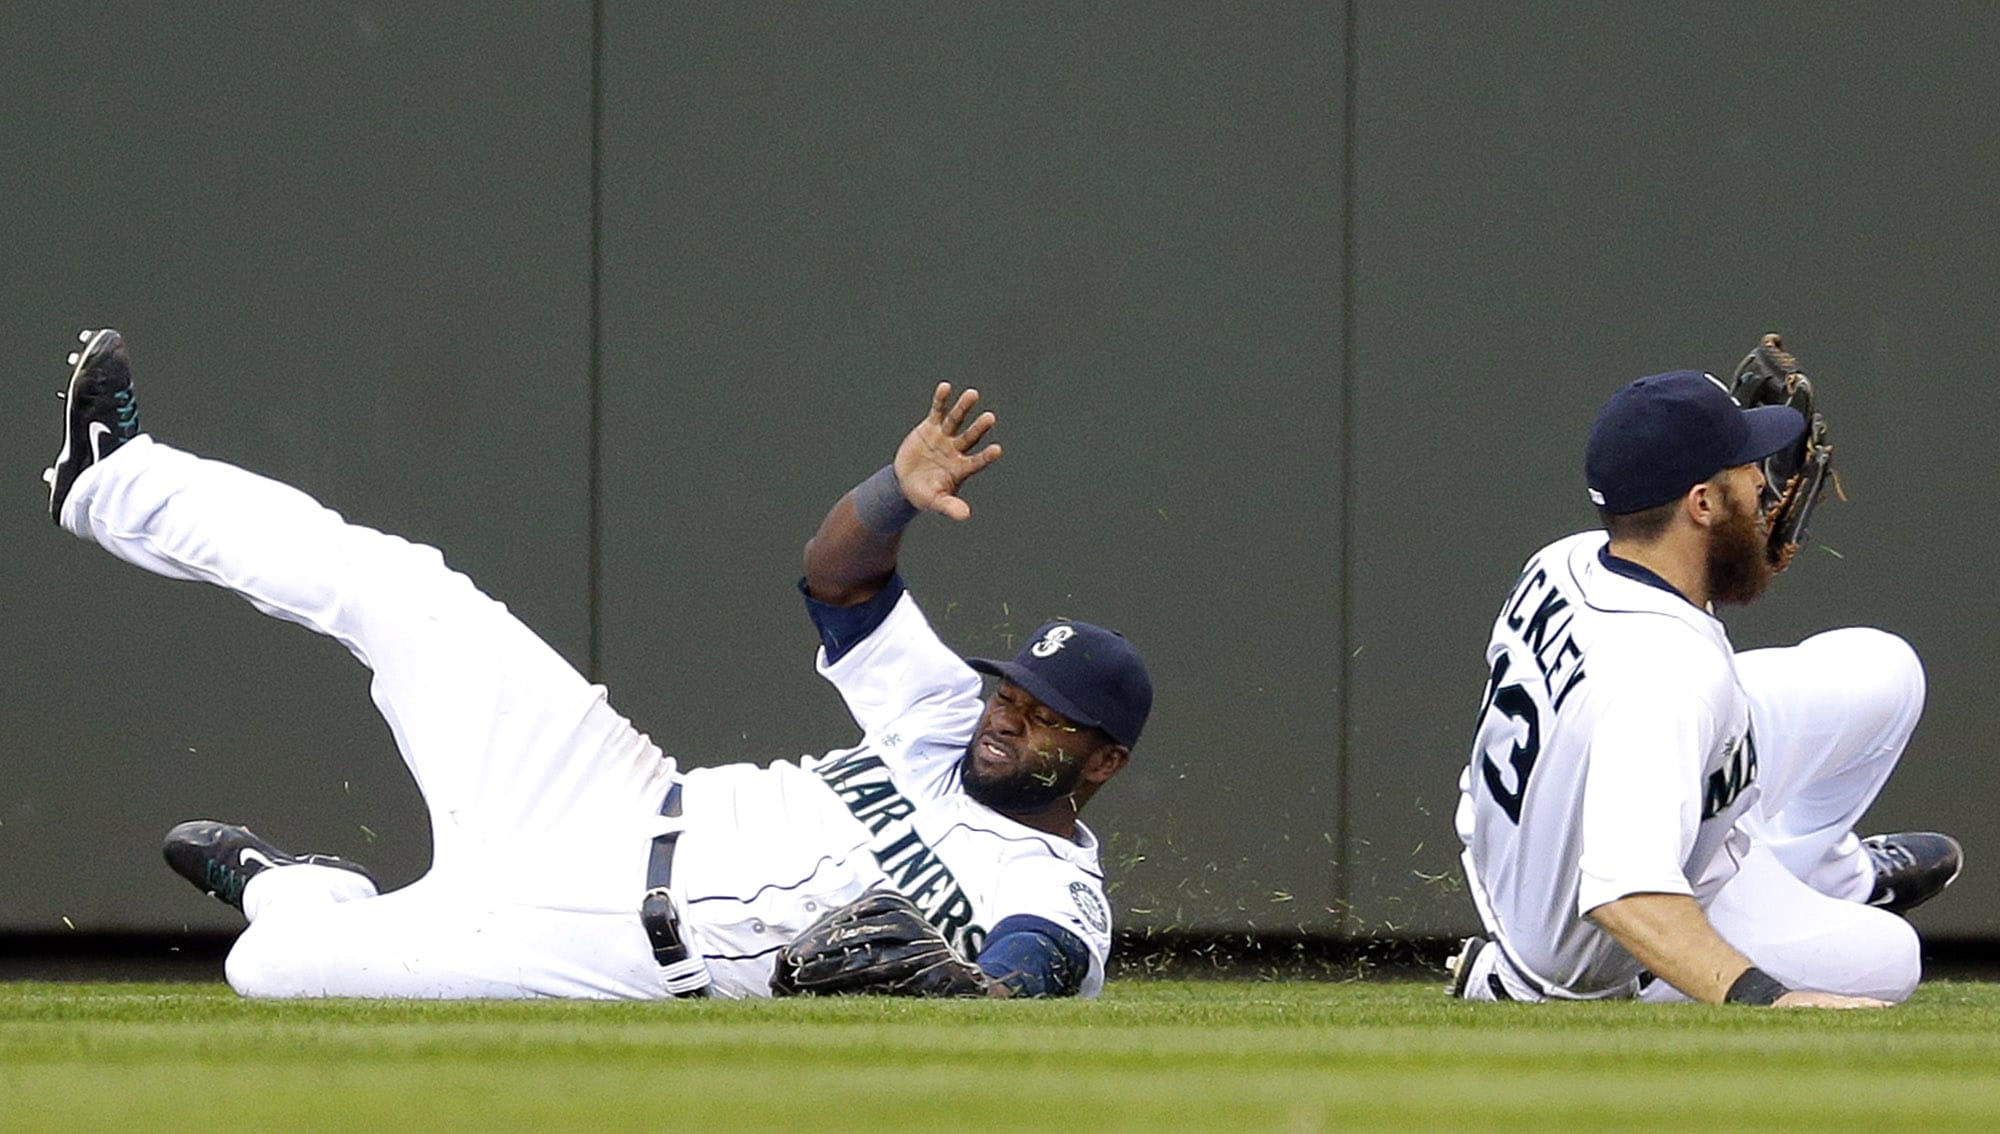 Seattle Mariners center fielder Abraham Almonte, left, slides in the outfield grass past center fielder Dustin Ackley, right, who caught but then dropped a fly ball hit by Oakland Athletics' Brandon Moss in the third inning of a baseball game on Saturday, April 12, 2014, in Seattle. (AP Photo/Ted S.